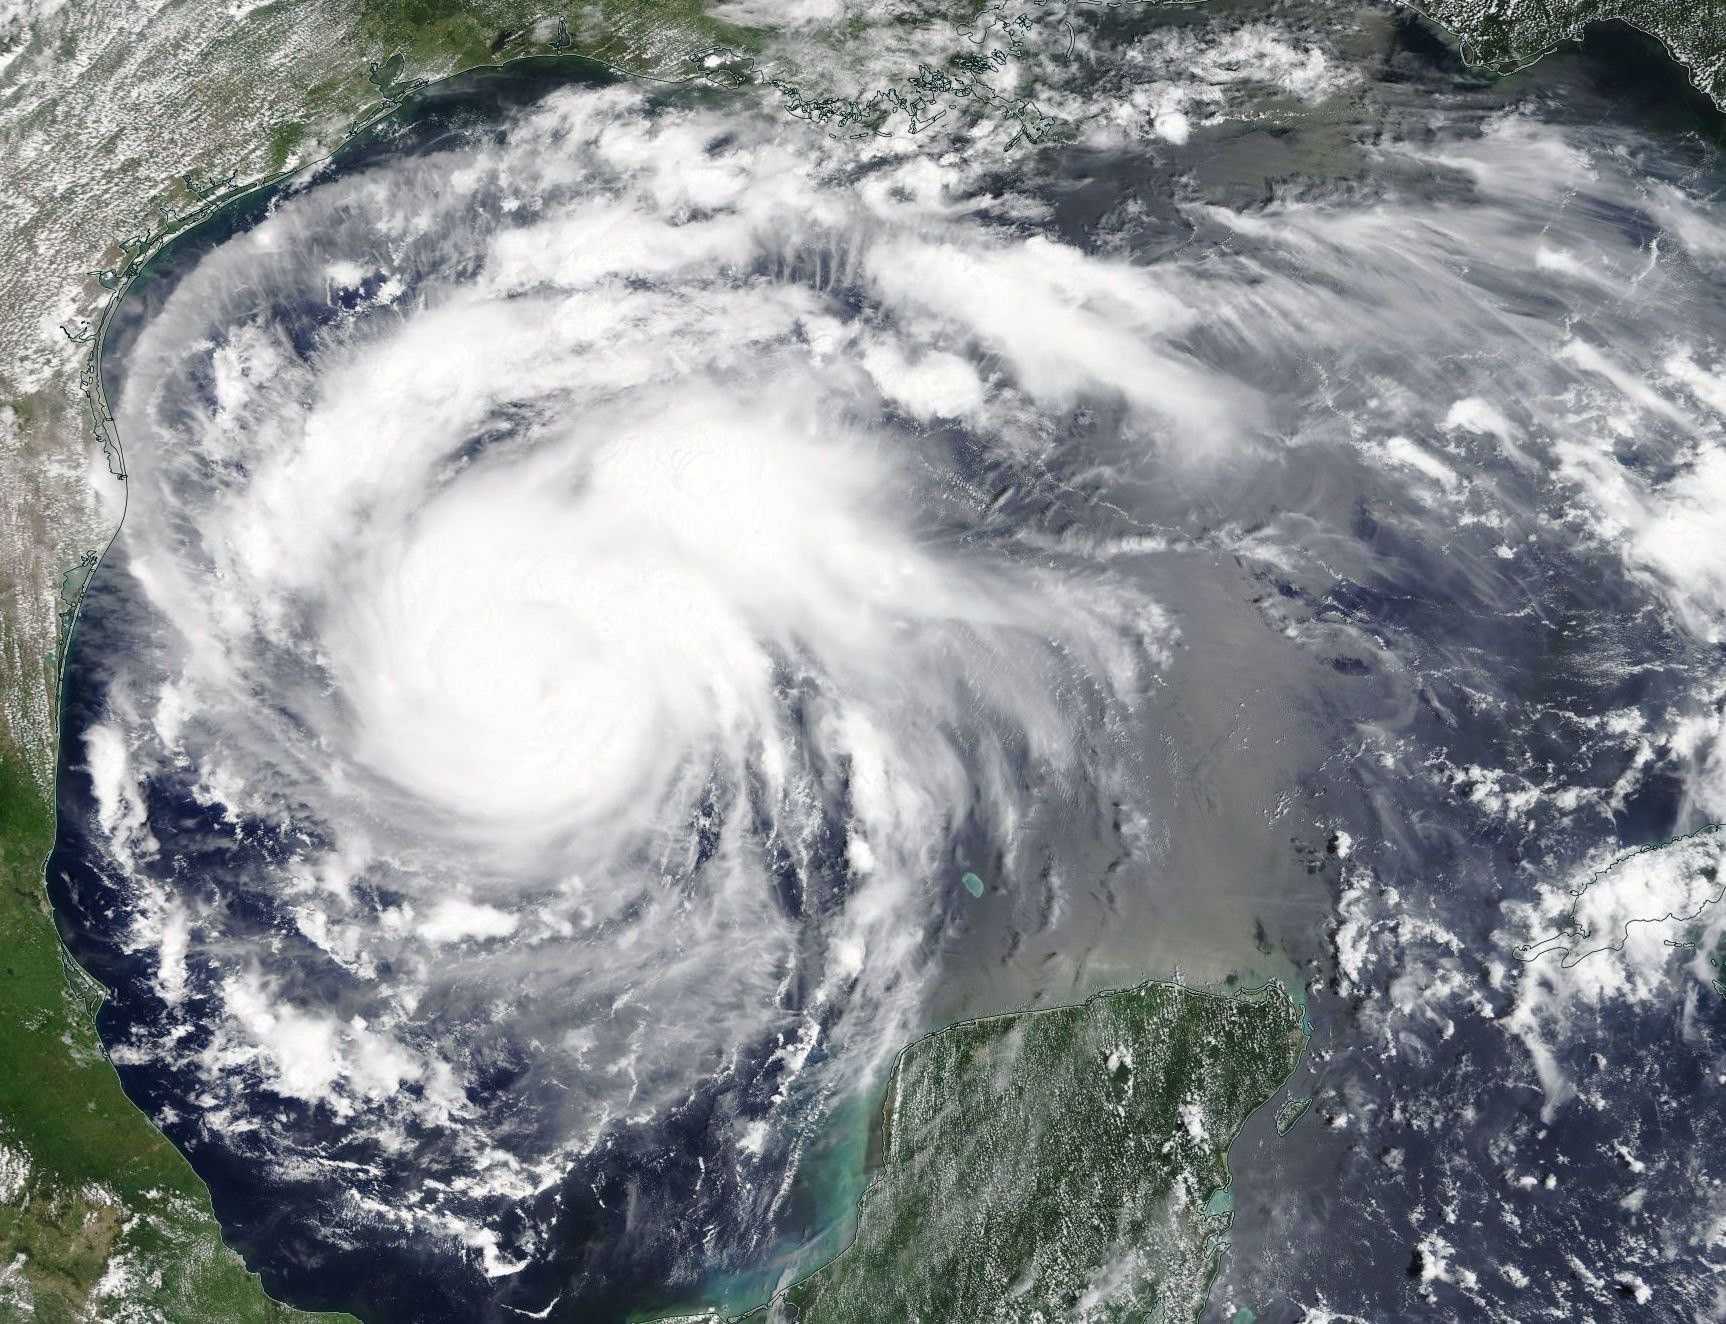 A handout photo made available by Nasa on August 24, 2017 shows a satellite image of Hurricane Harvey in the Gulf of Mexico. Harvey is expected to become a category 3 hurricane by the time it makes landfall near Corpus Christi, Texas late on Friday, August 25. Photo: Nasa handout via EPA